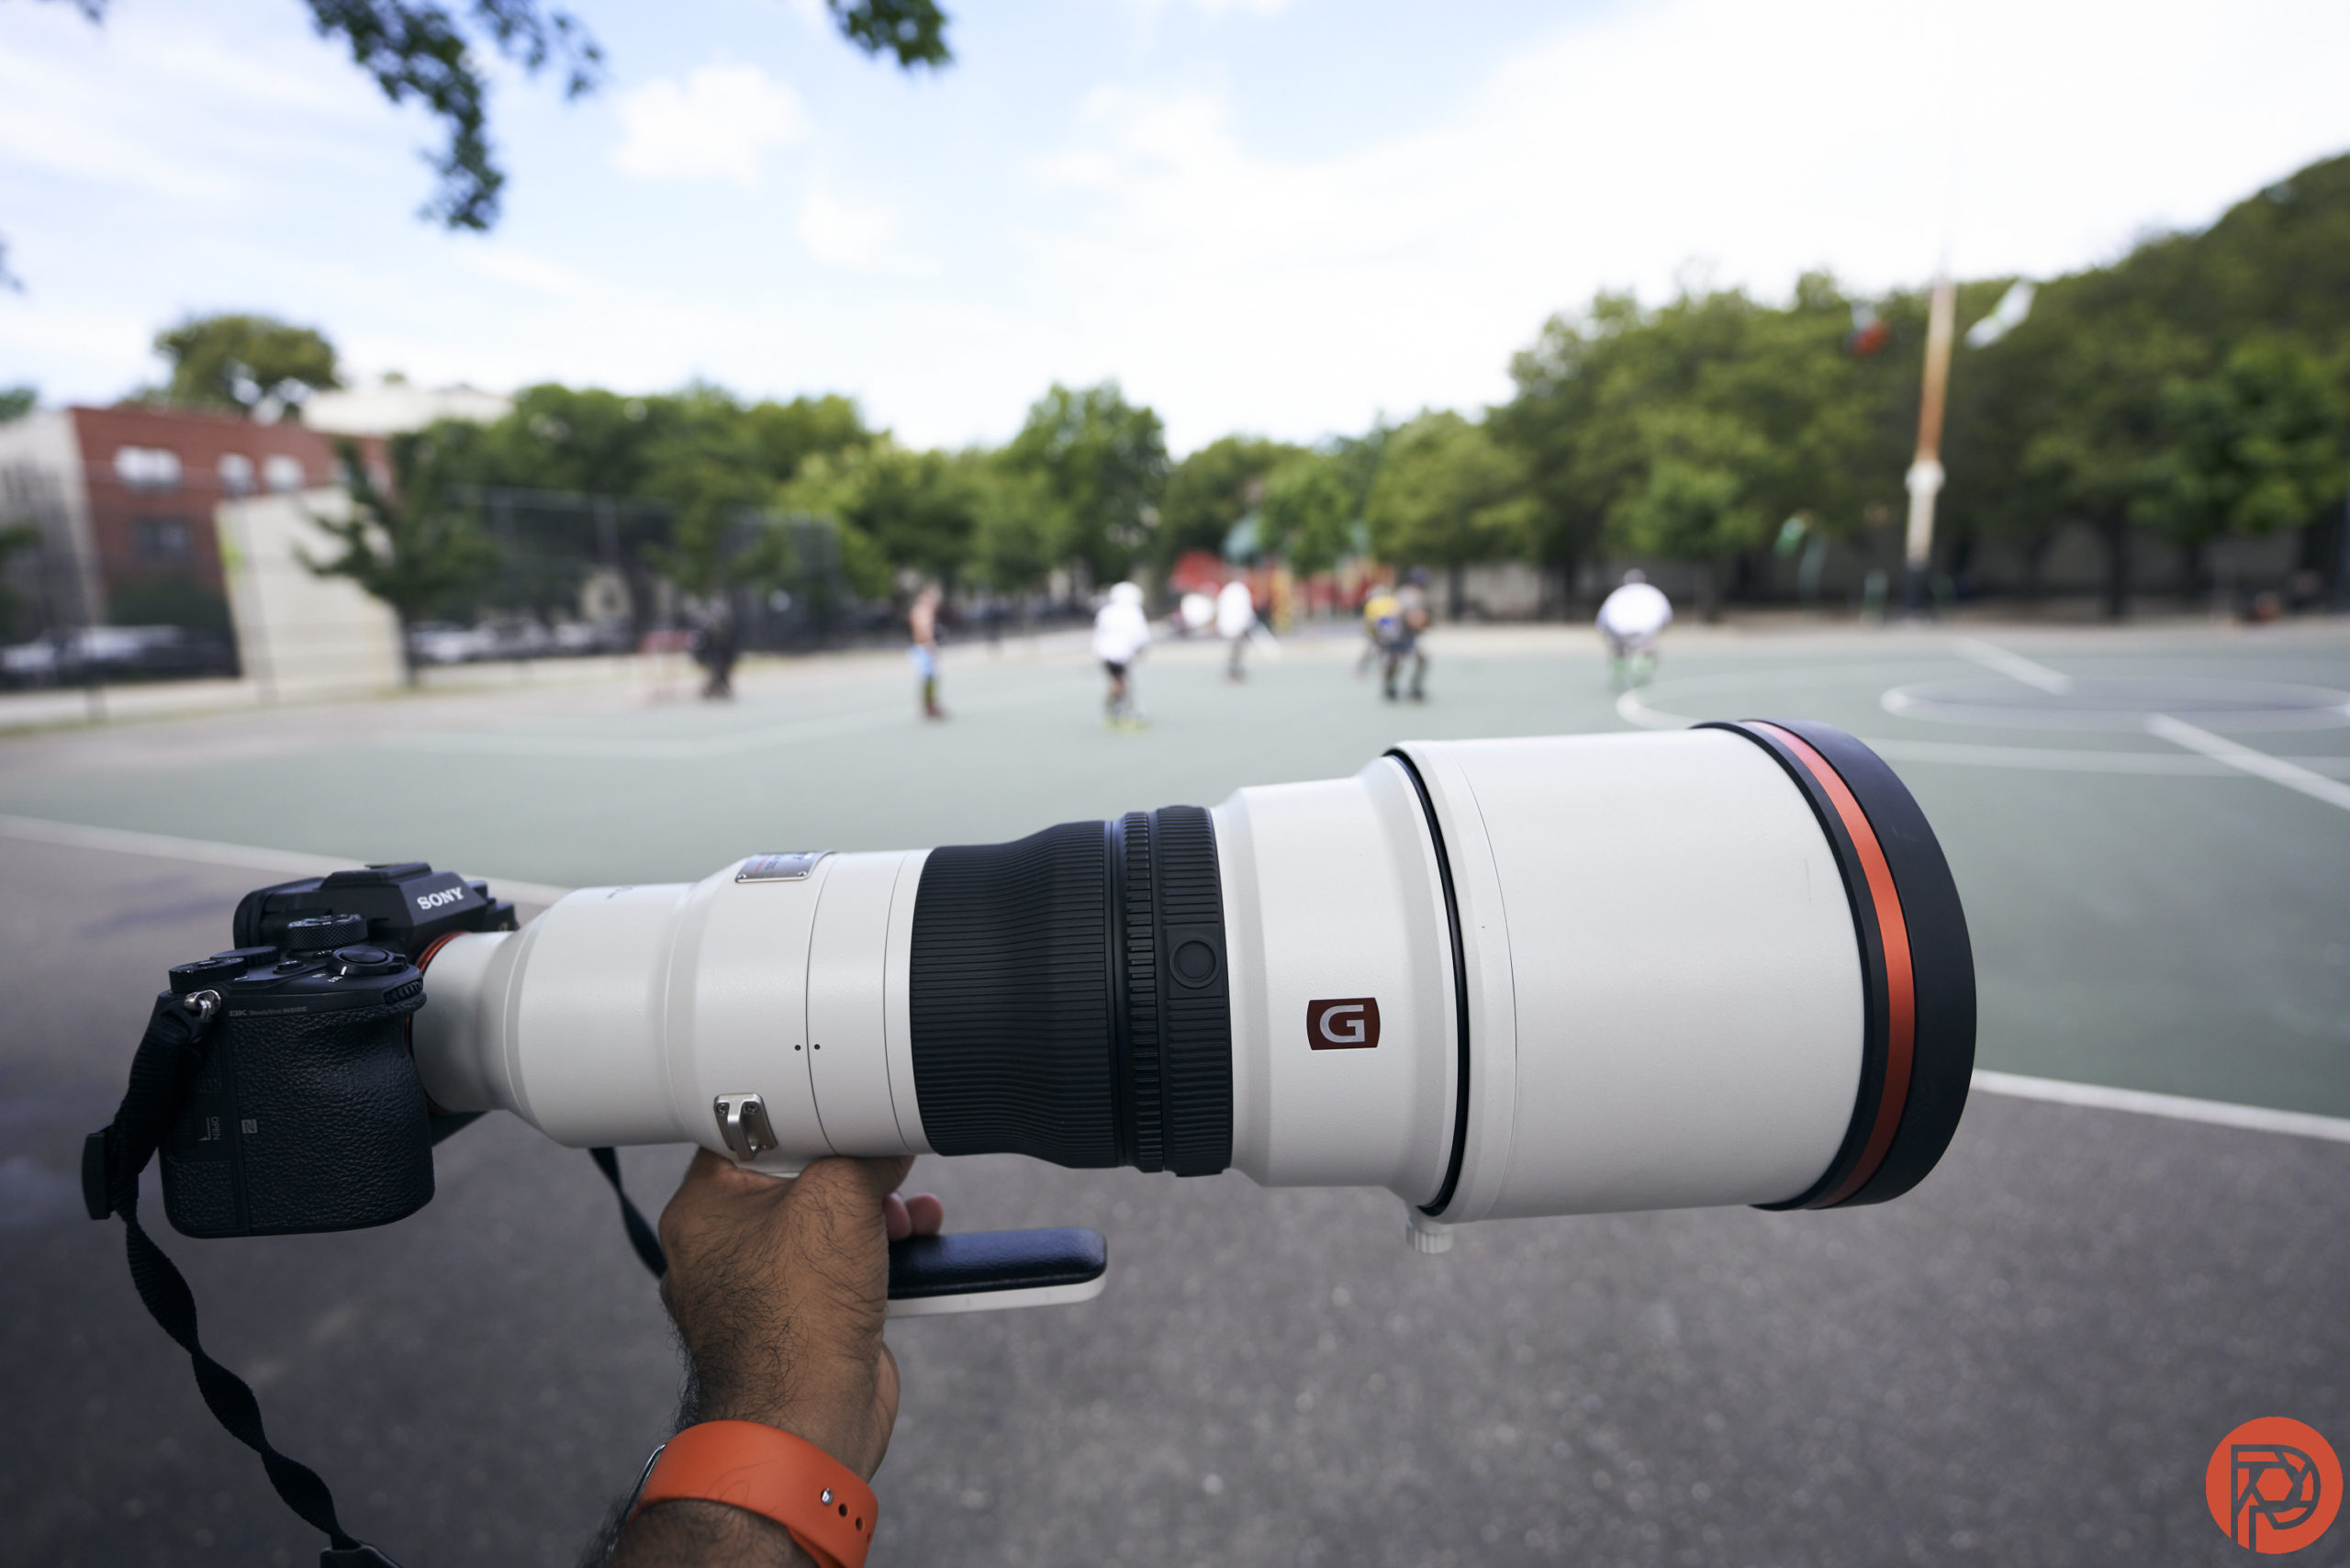 Chris Gampat The Phoblographer Sony 400mm f2.8 G Master review product images 2.81-2000s200 3